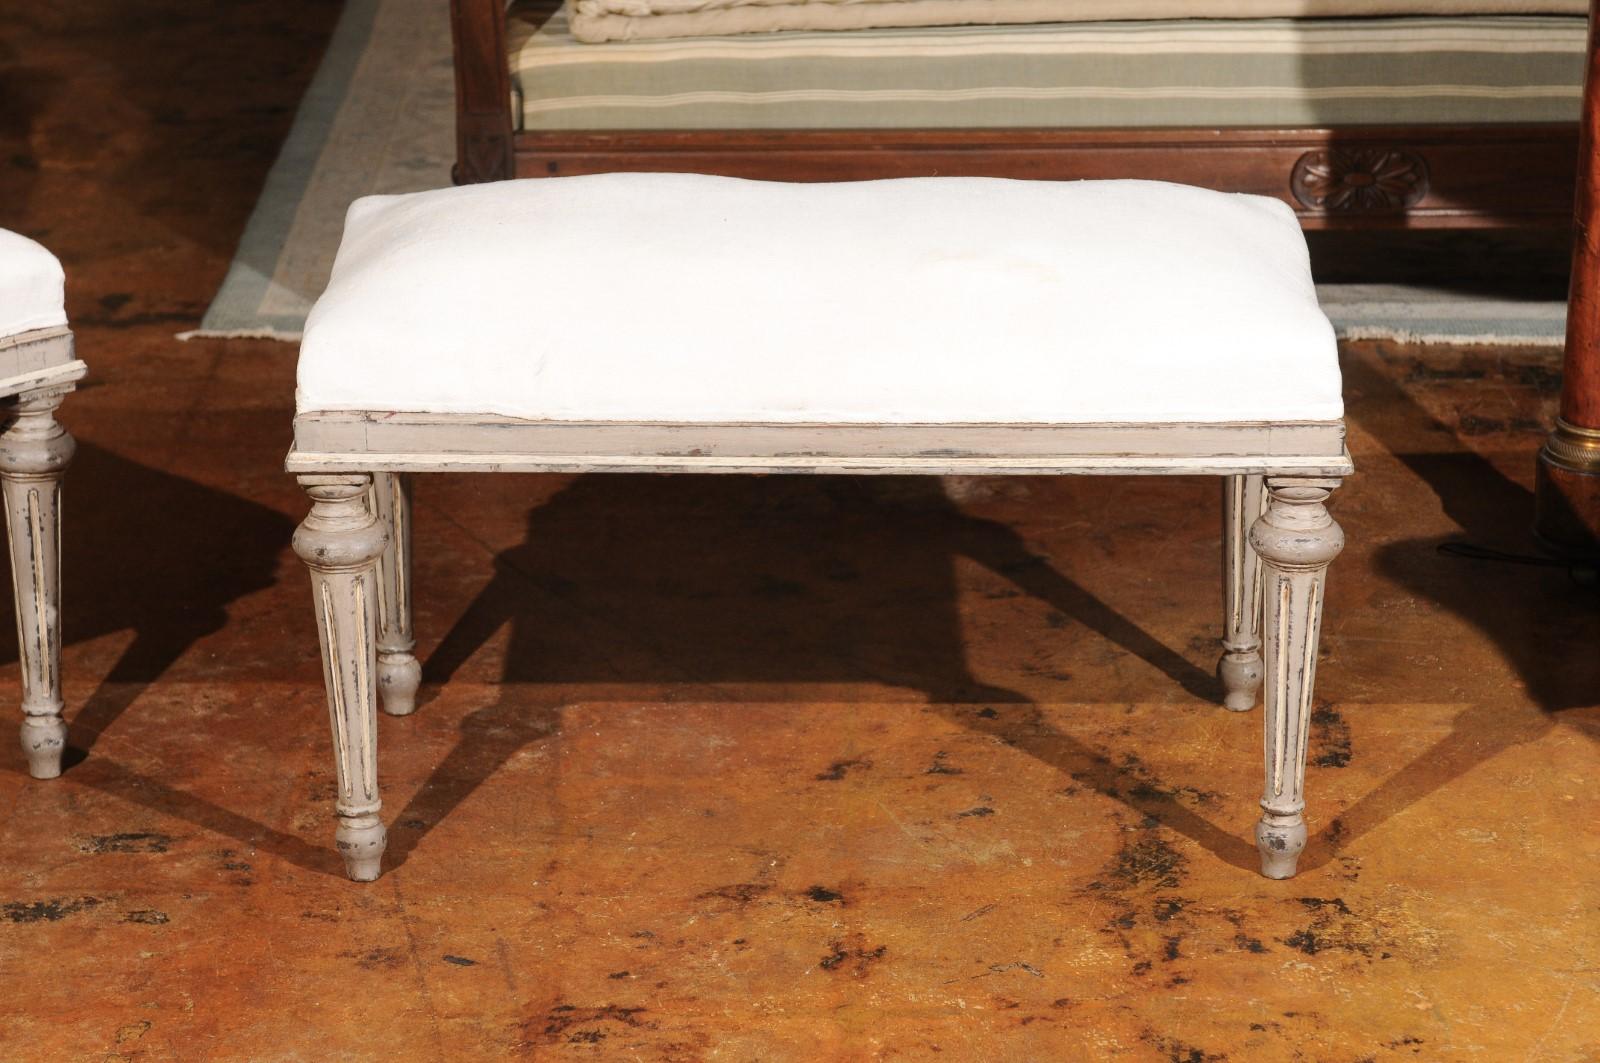  French 19th Century Louis XVI Style Painted Benche with Fluted Legs 1